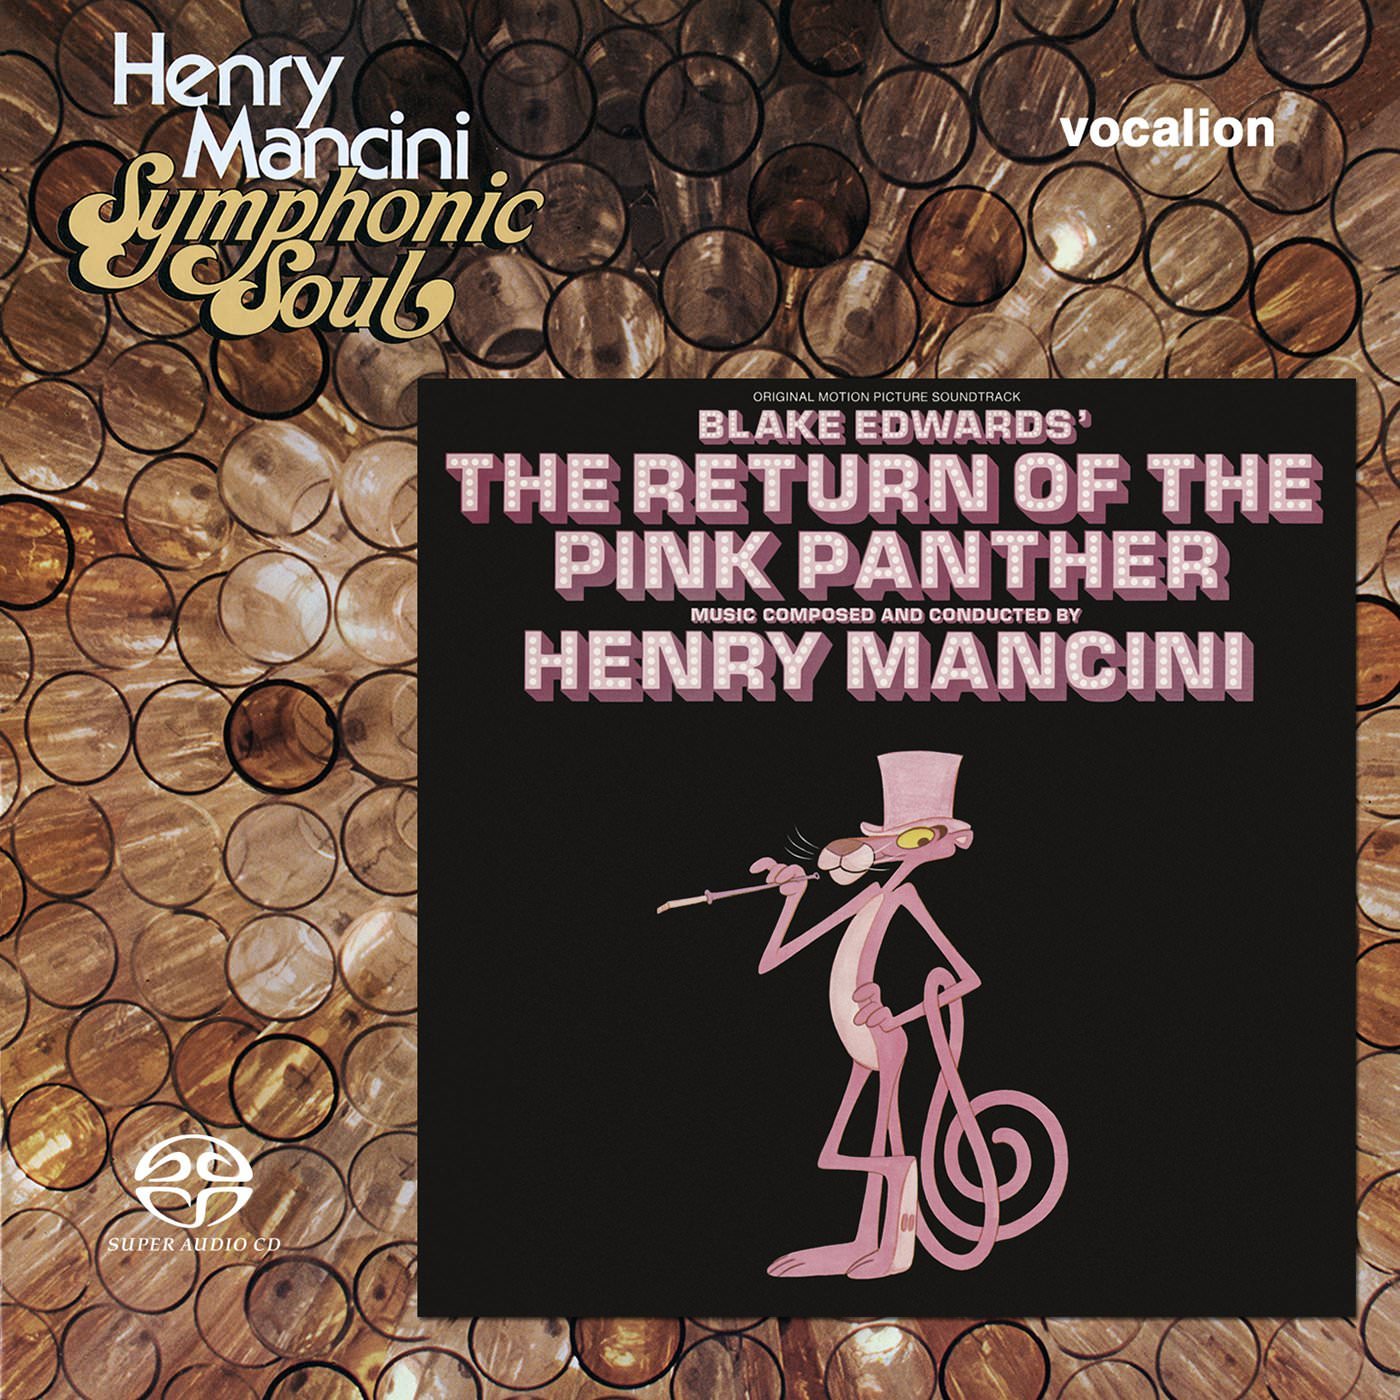 Henry Mancini – Return Of The Pink Panther & Symphonic Soul (1975) [Reissue 2018] MCH SACD ISO + DSF DSD64 + Hi-Res FLAC